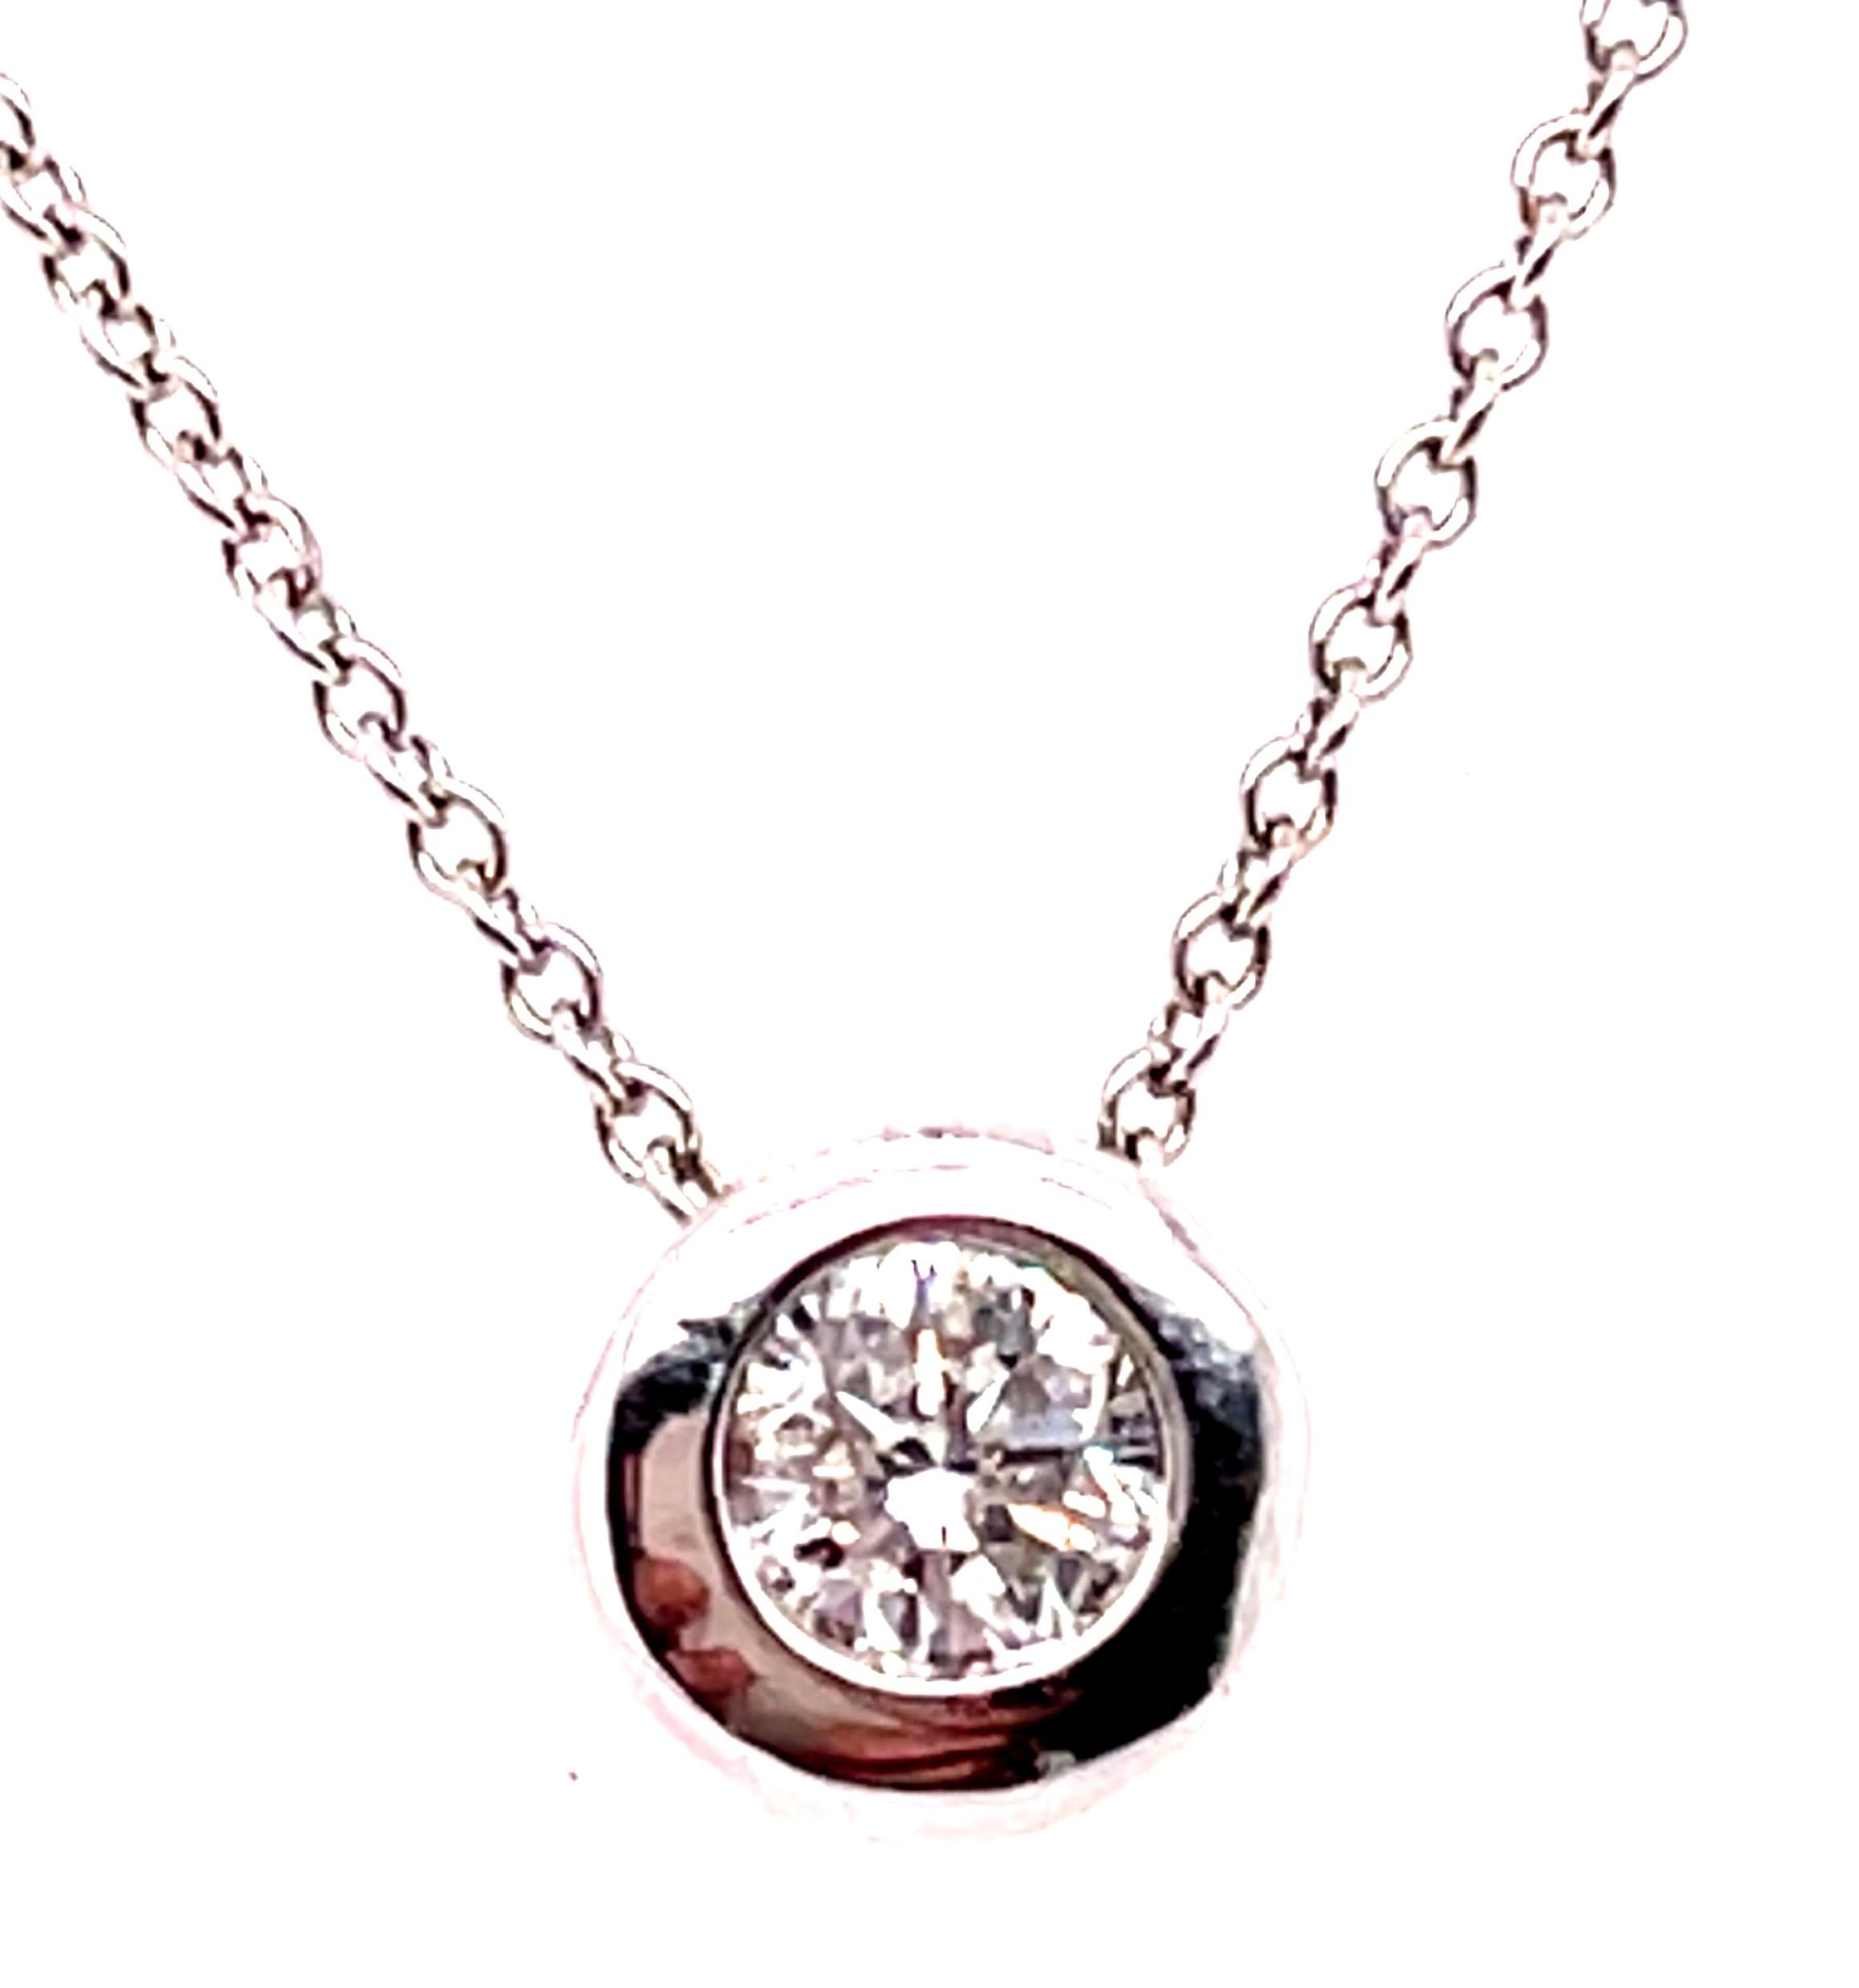 Contemporary 14 Karat White Gold Fancy Necklace with Diamond Pendant For Sale